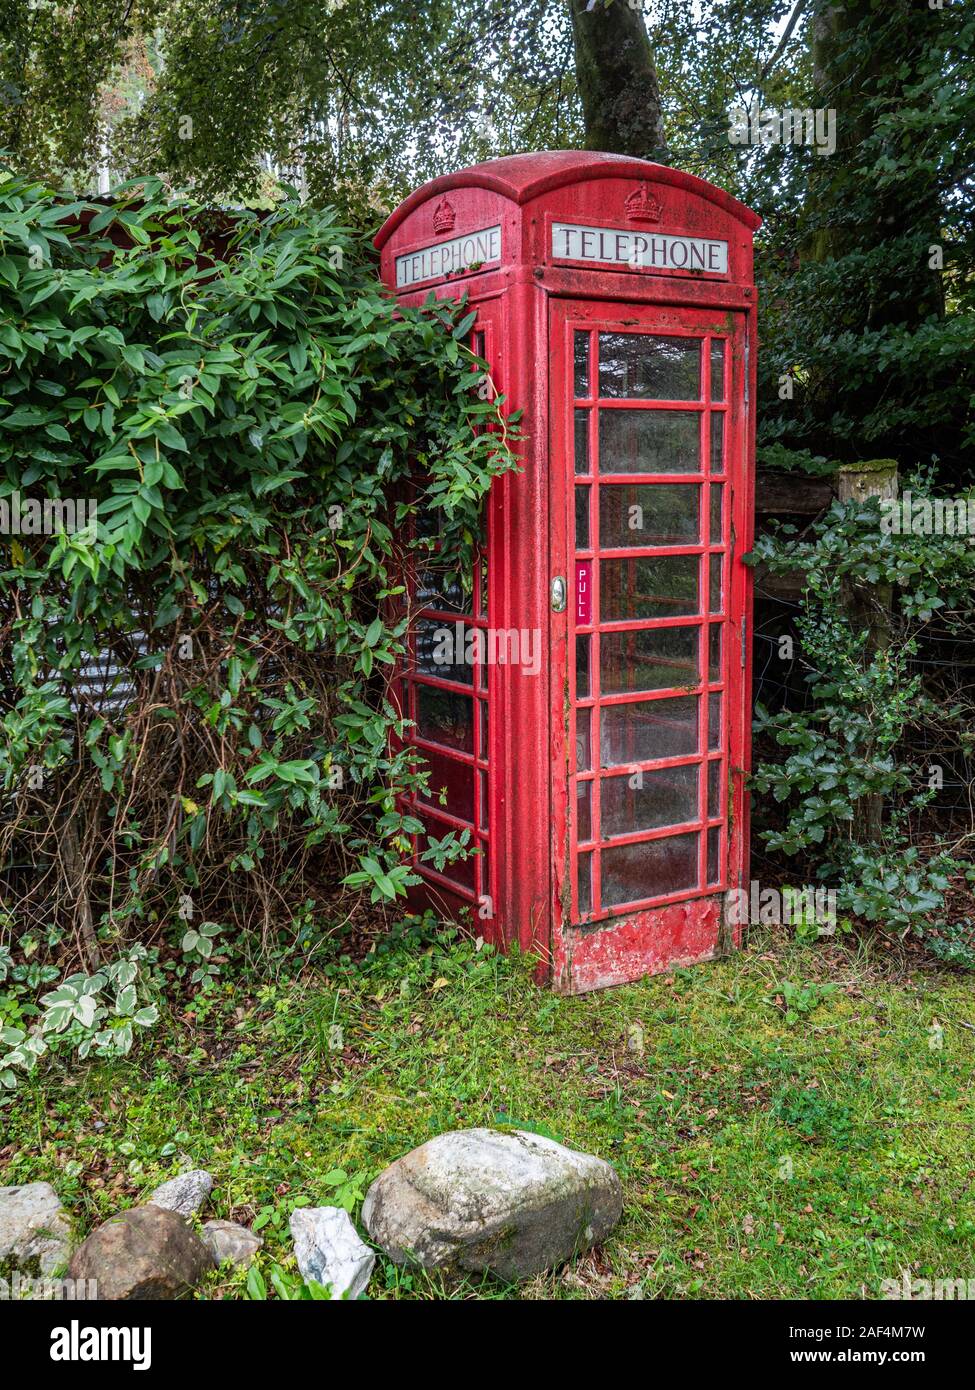 An old K6 type red telephone booth which were introduced by the General Post Office in the UK over many years. Stock Photo